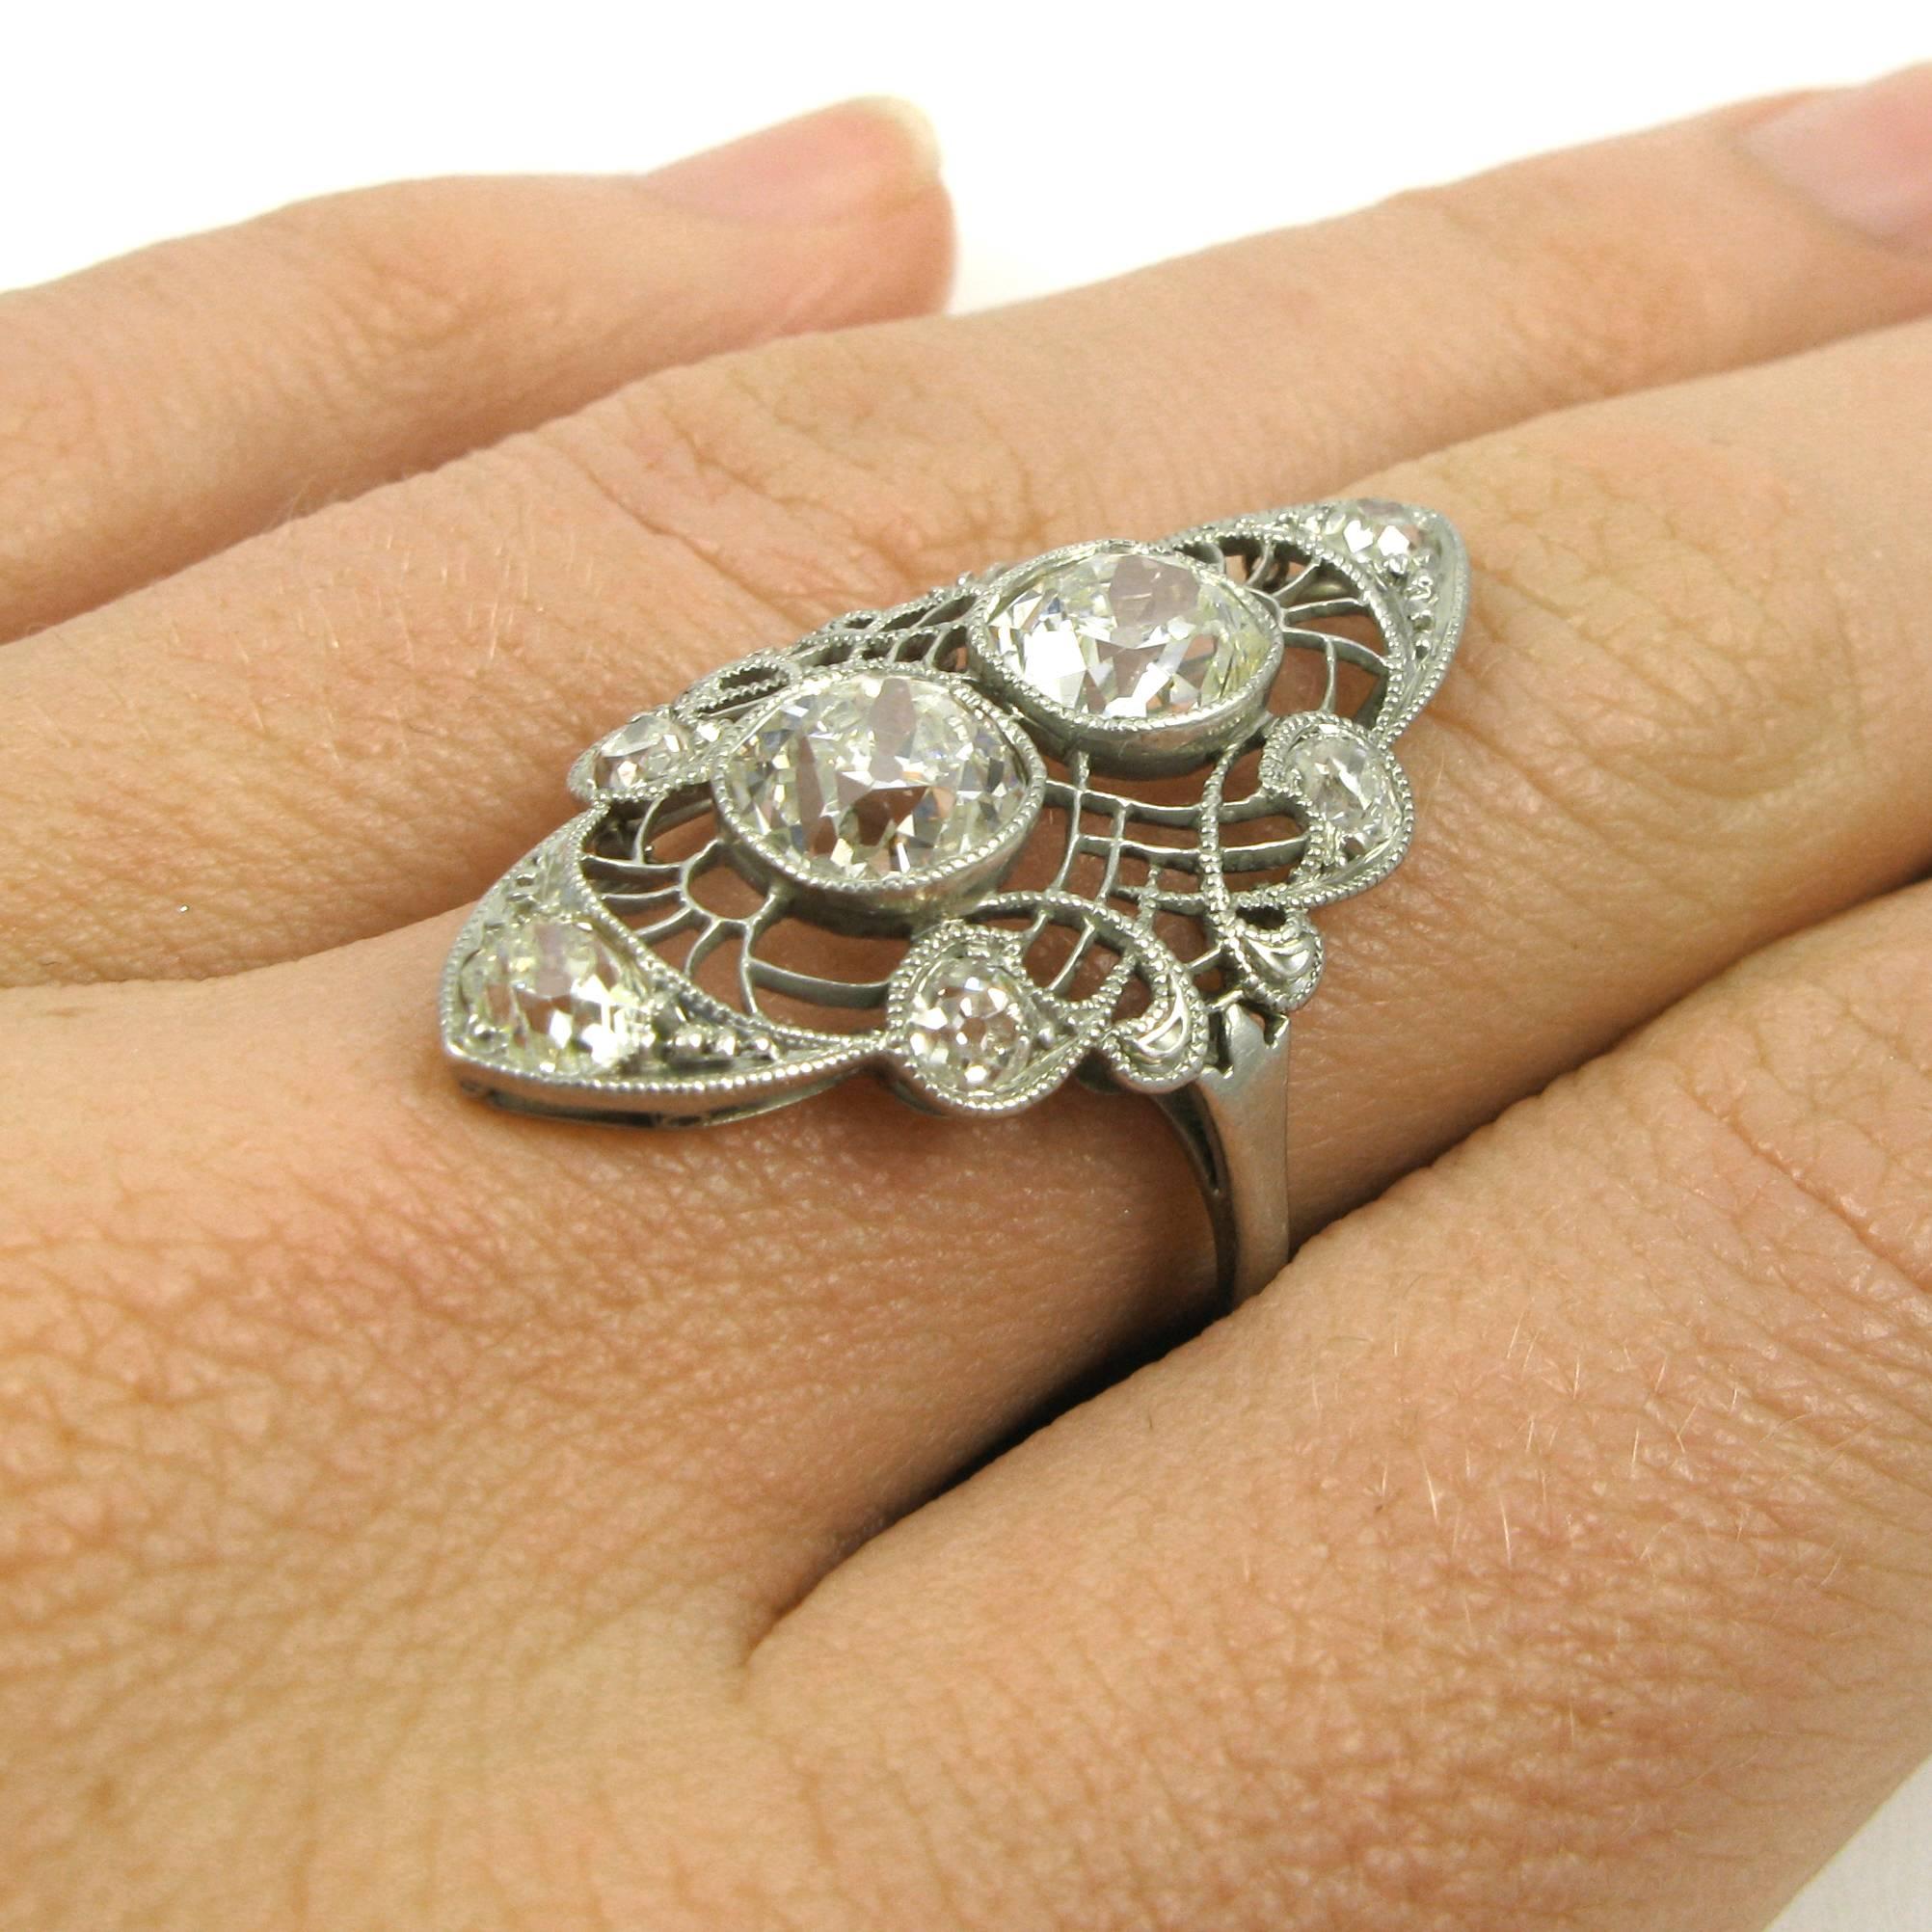 A lovely vintage piece featuring eight Old Mine-cut diamonds of various sizes set in an elaborately filigreed dinner style mounting atop a thin ring shank. Platinum, with delicate wirework and milgrain accents. 